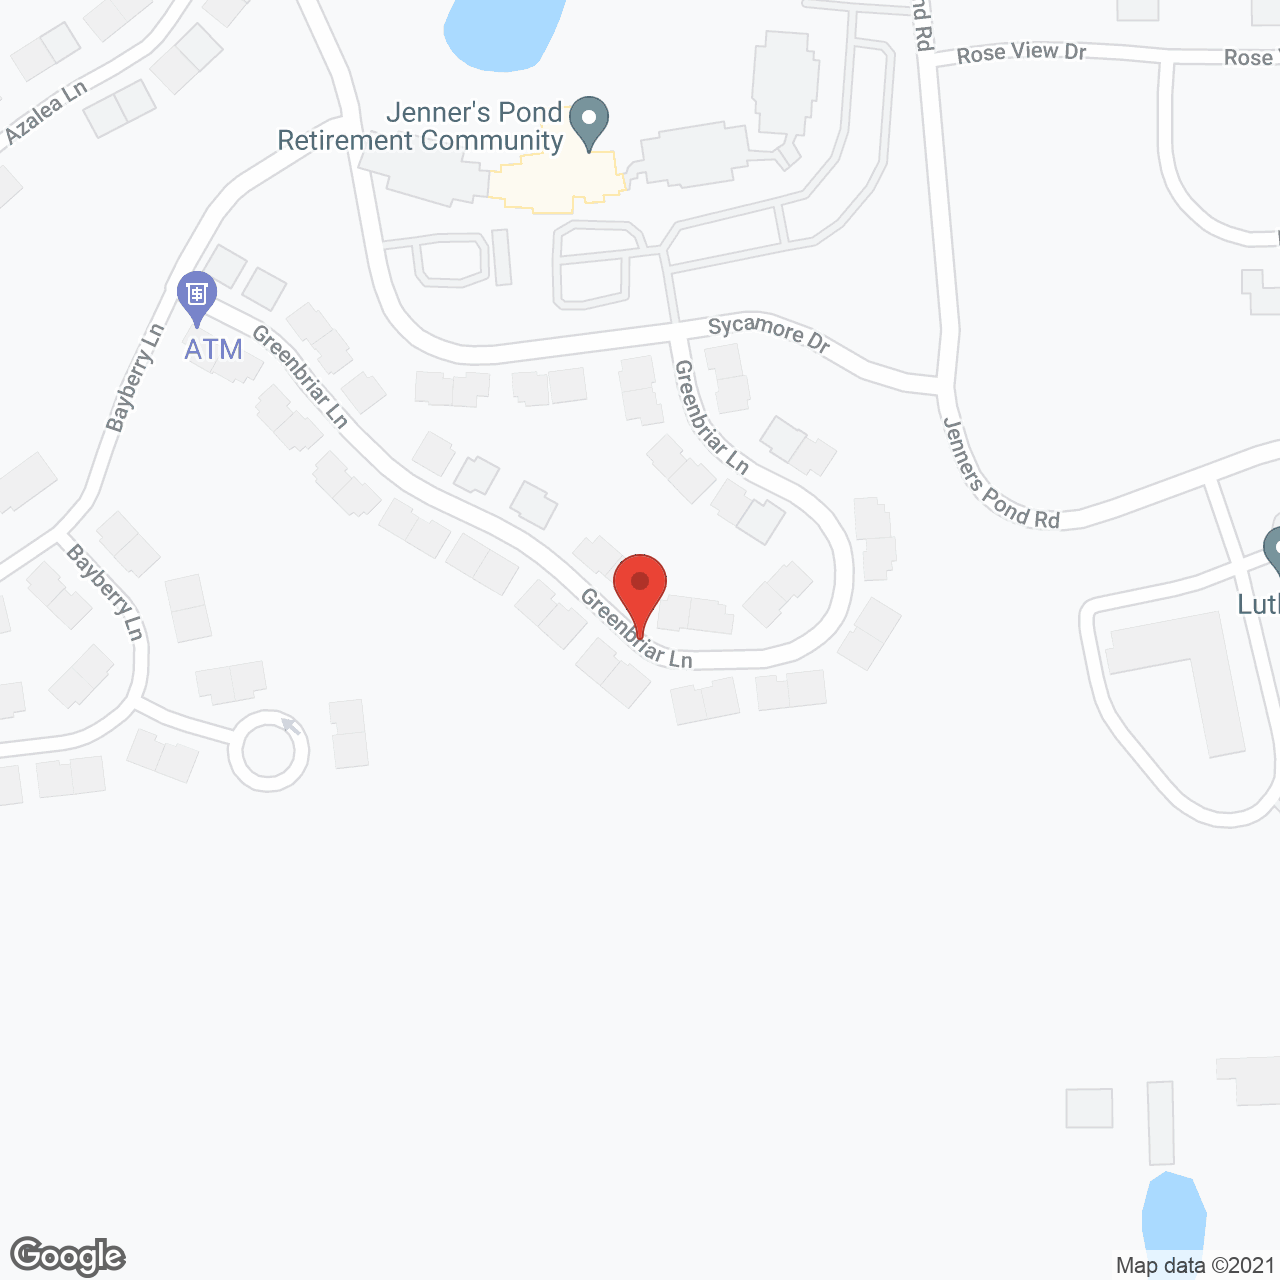 Simpson at Jenner's Pond,  a CCRC in google map